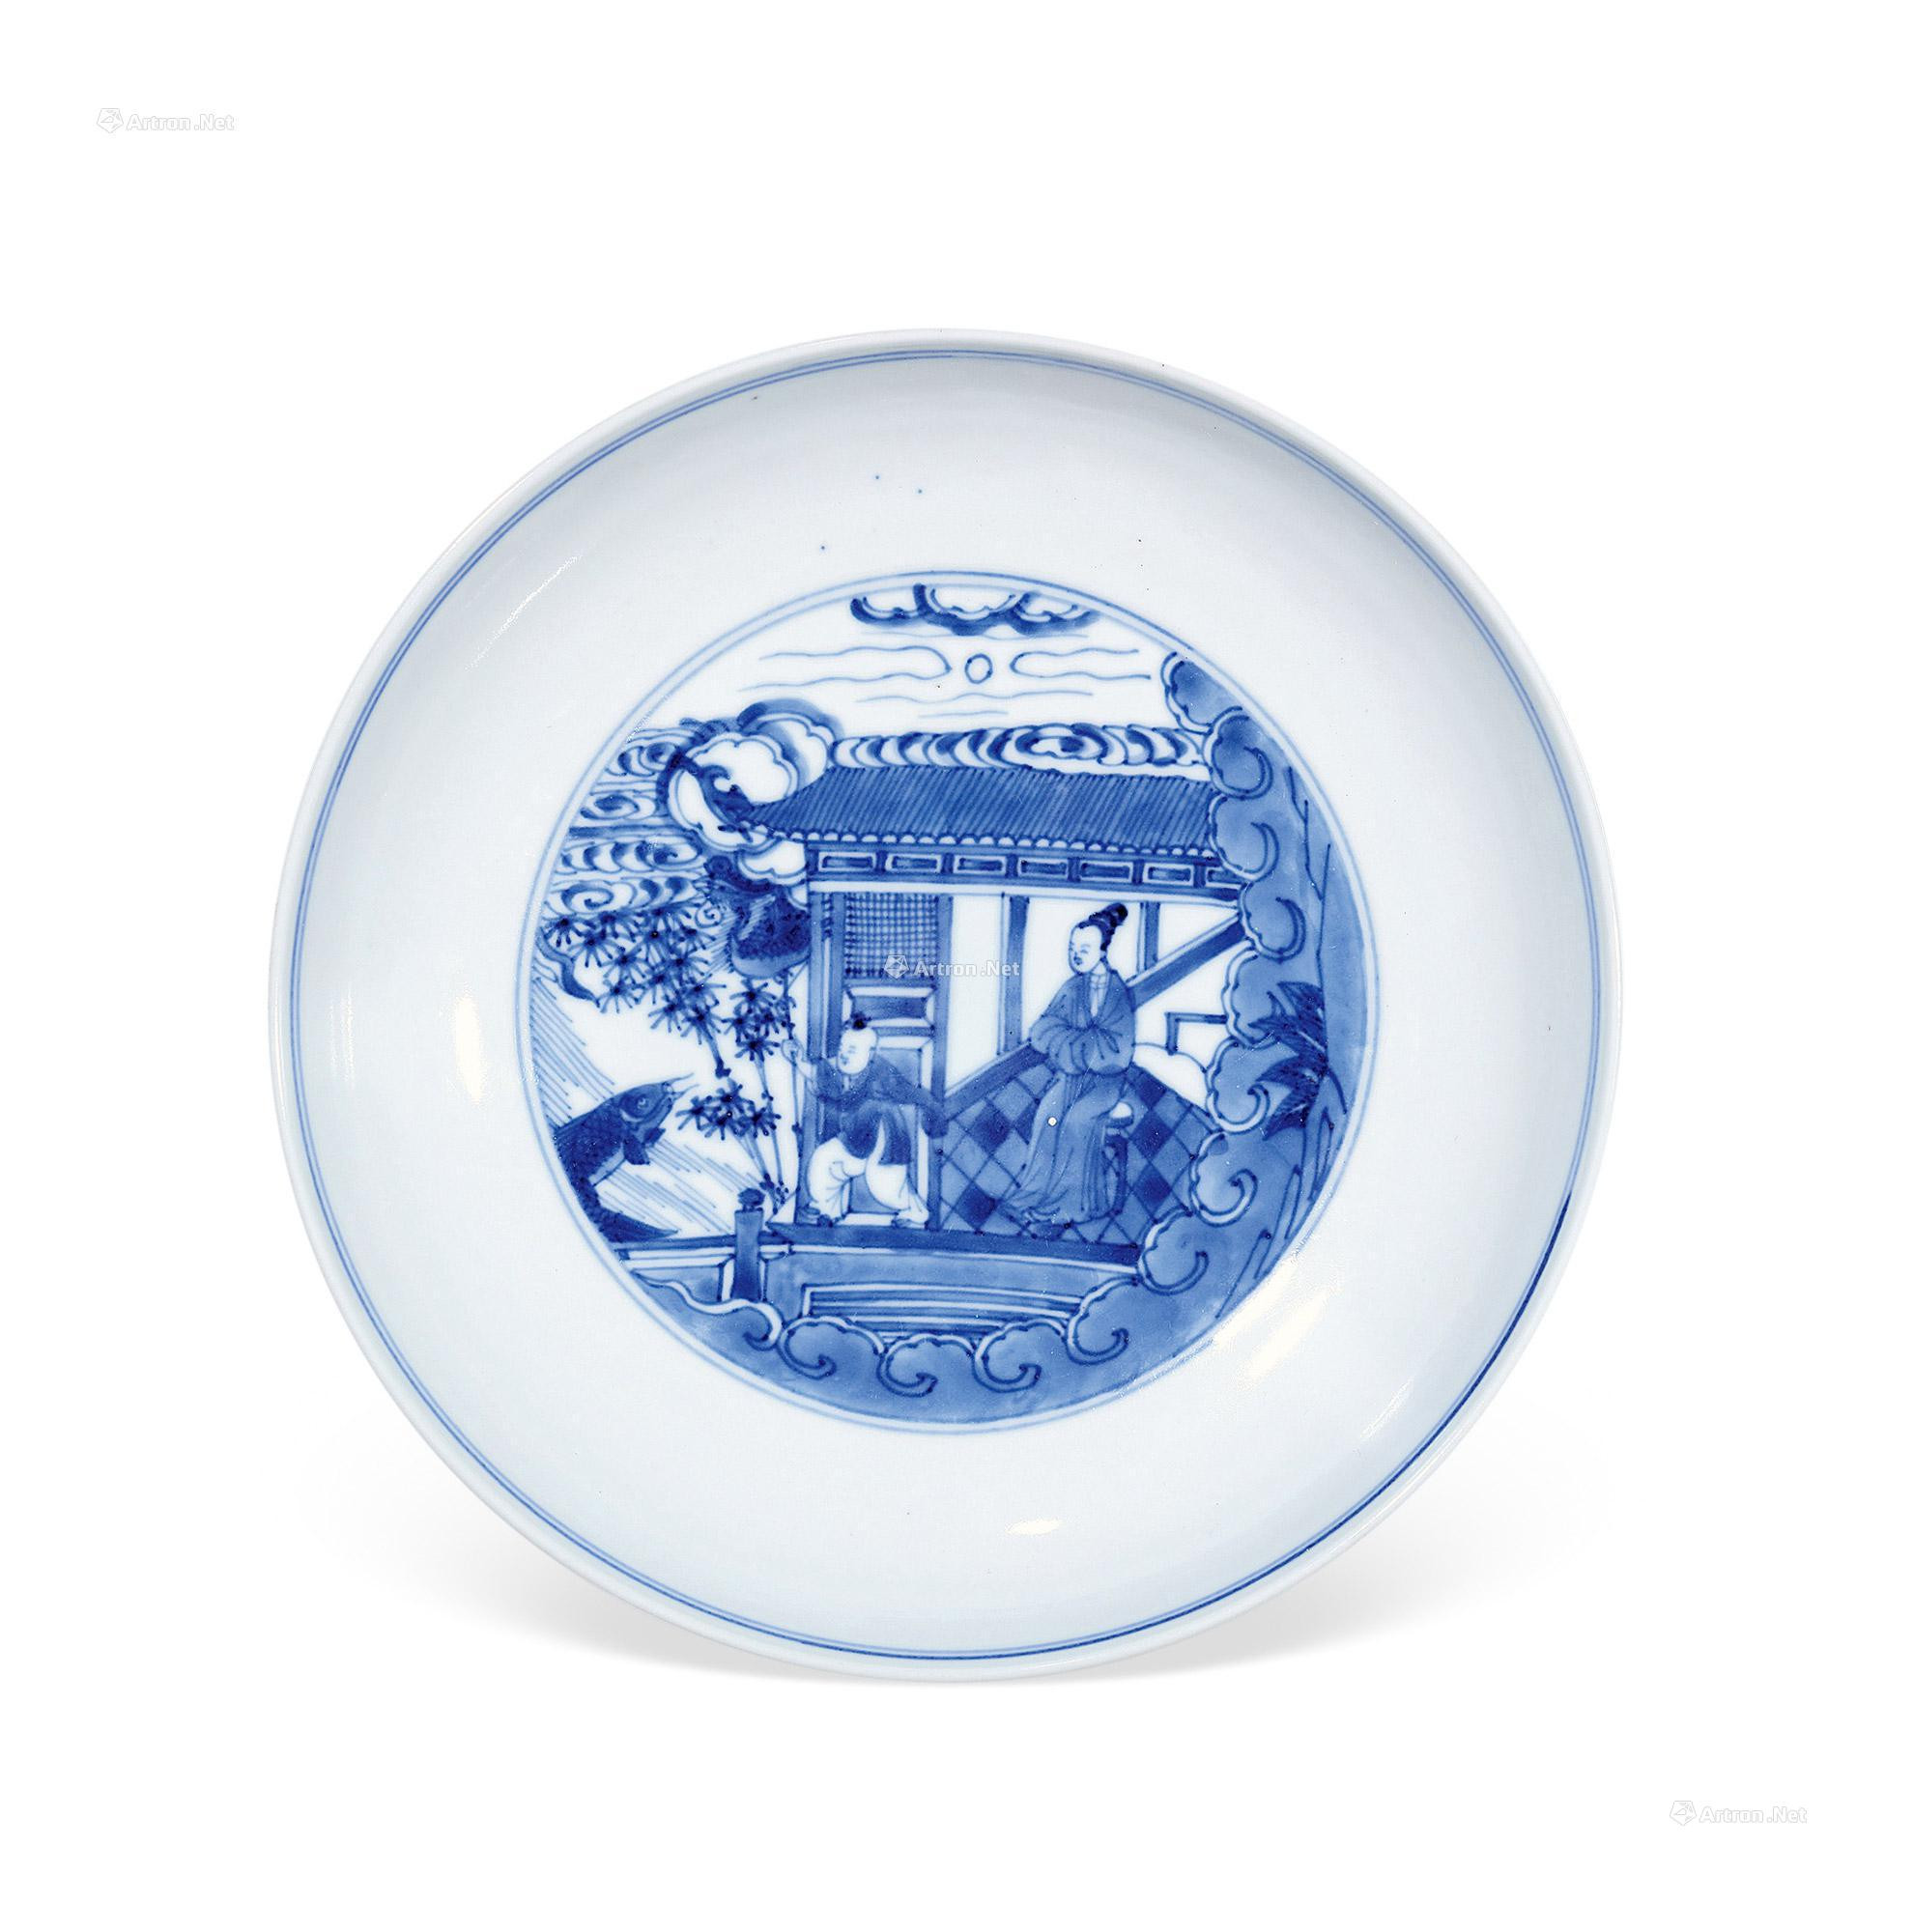 A BLUE AND WHITE PLATE WITH WOMEN AND BABIES PLAY GAMES DISIGN